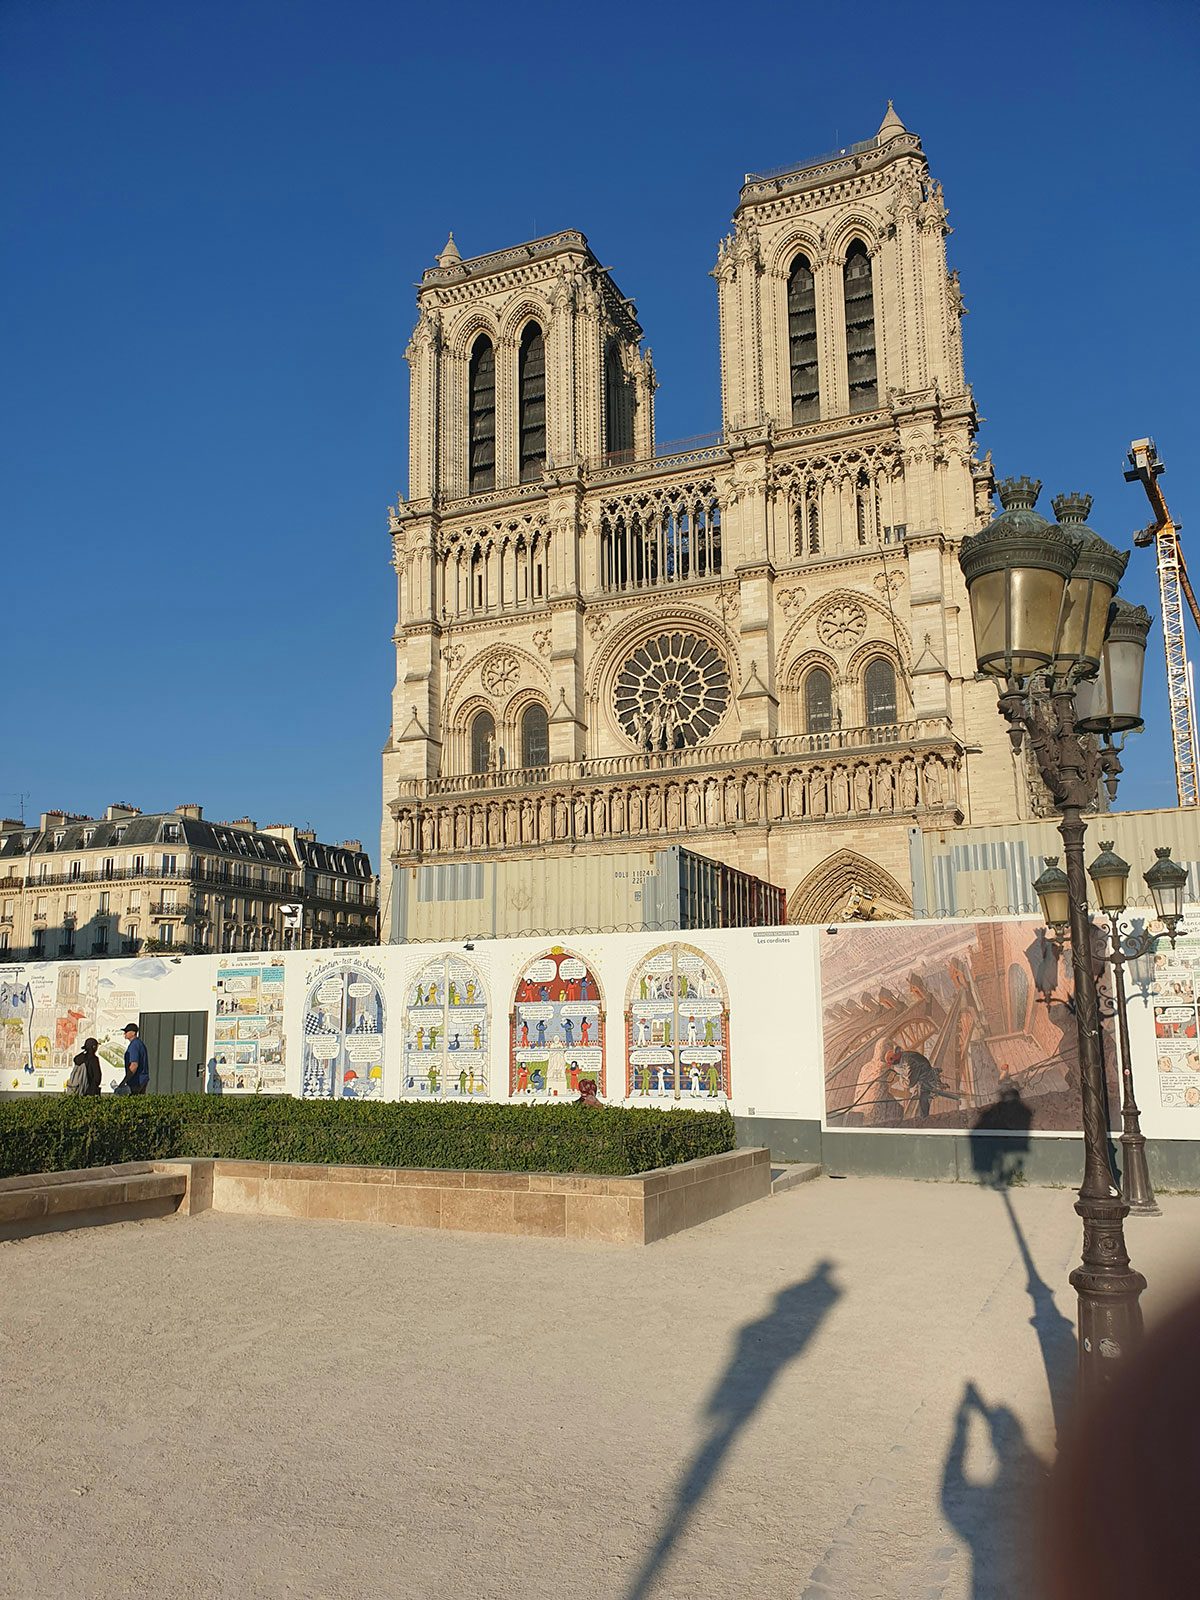 Notre Dame illustrated hoarding project